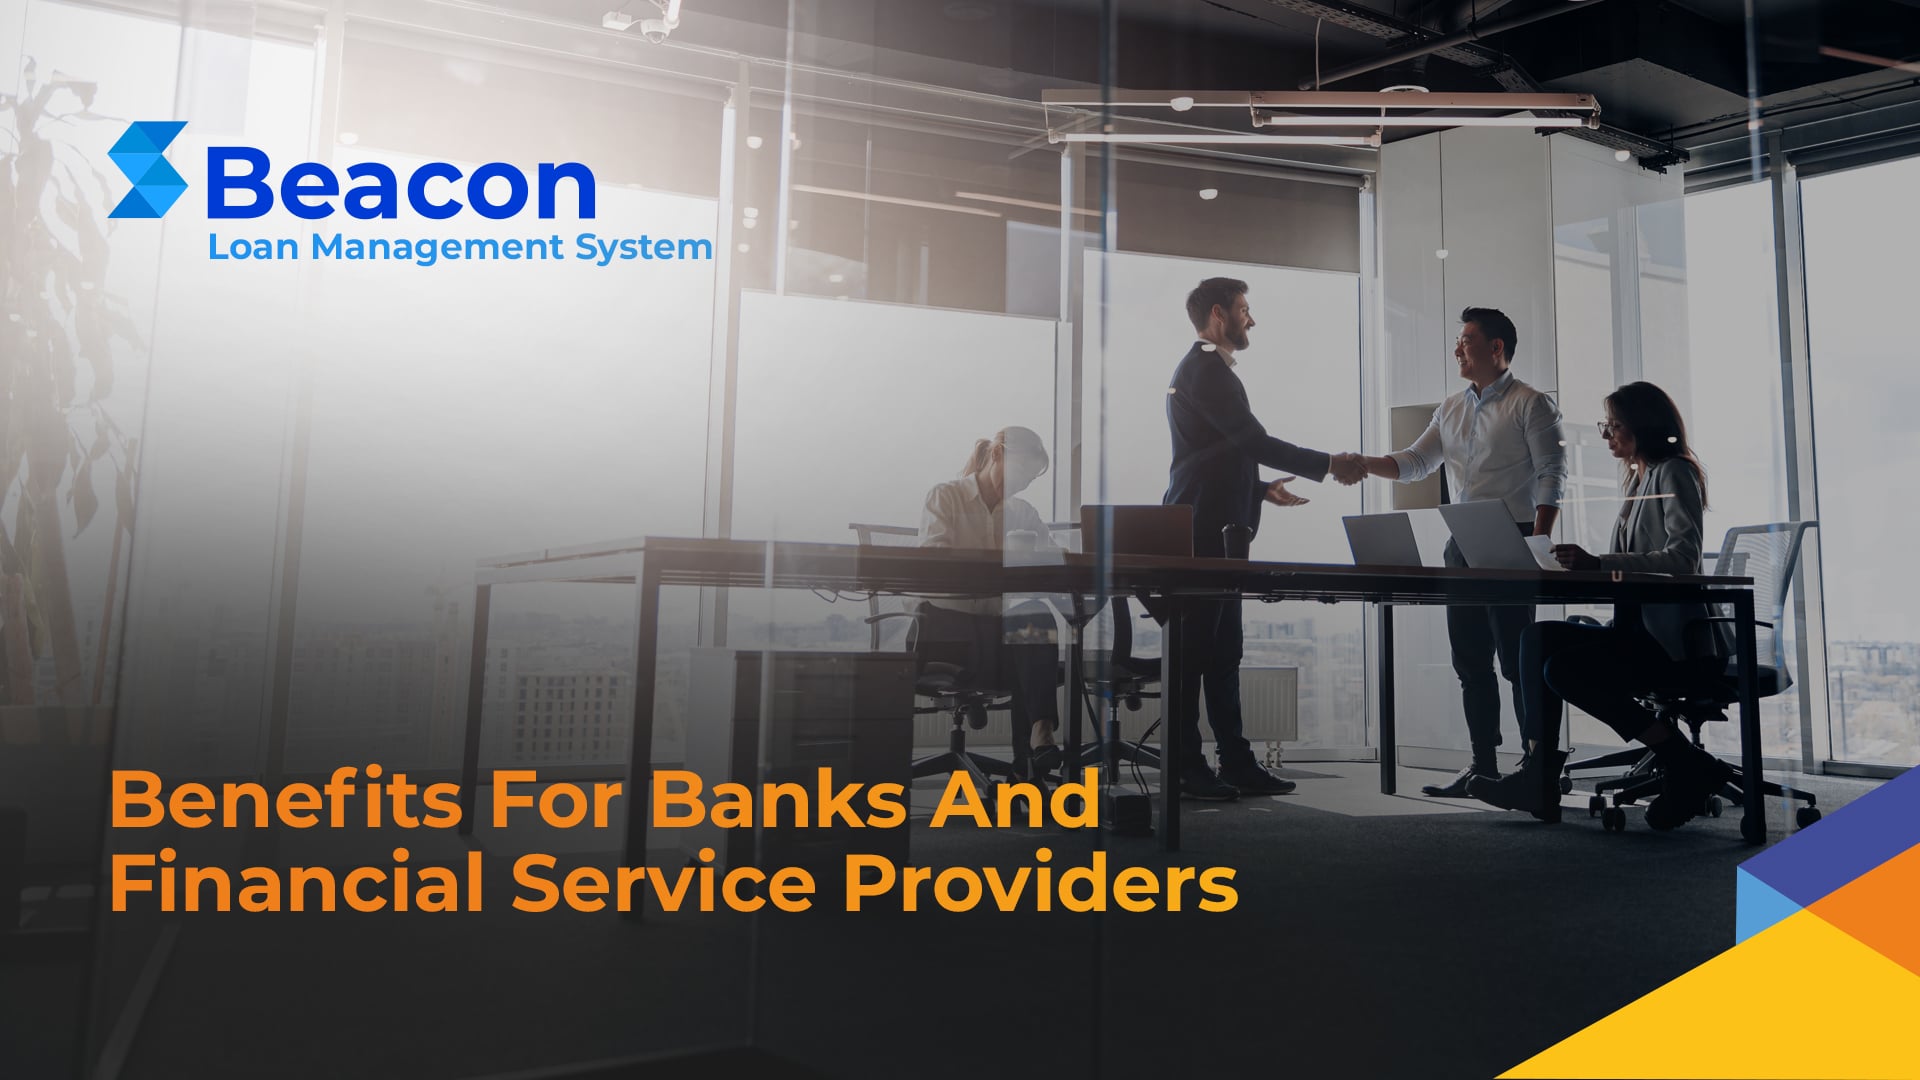 Loan Management System: Benefits For Banks And Financial Service Providers